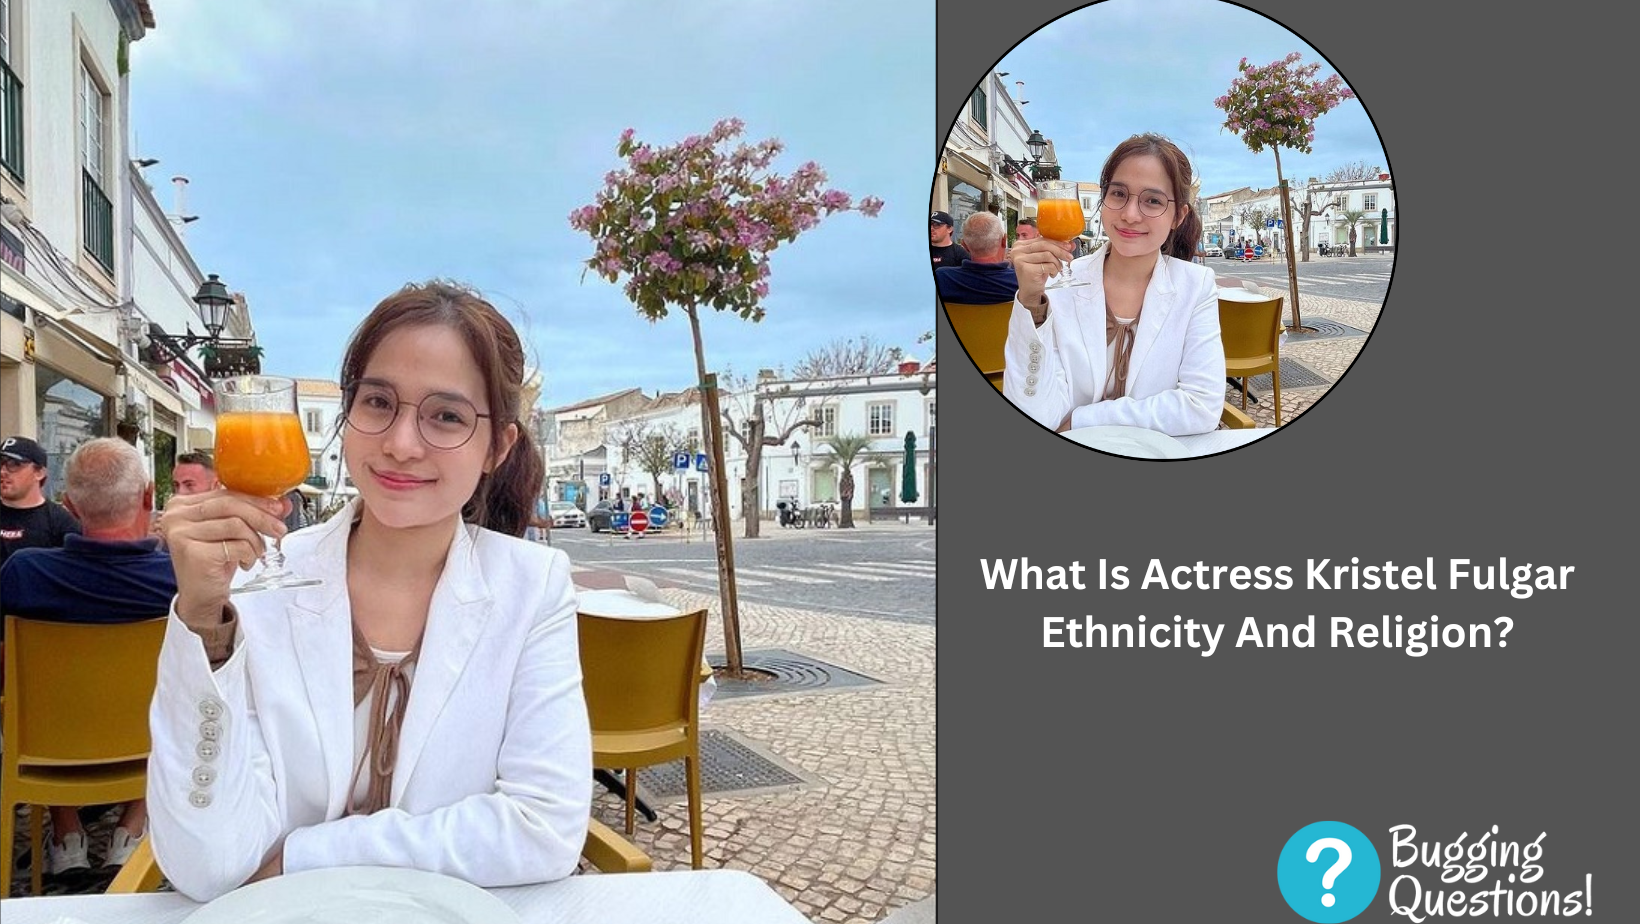 What Is Actress Kristel Fulgar Ethnicity And Religion?